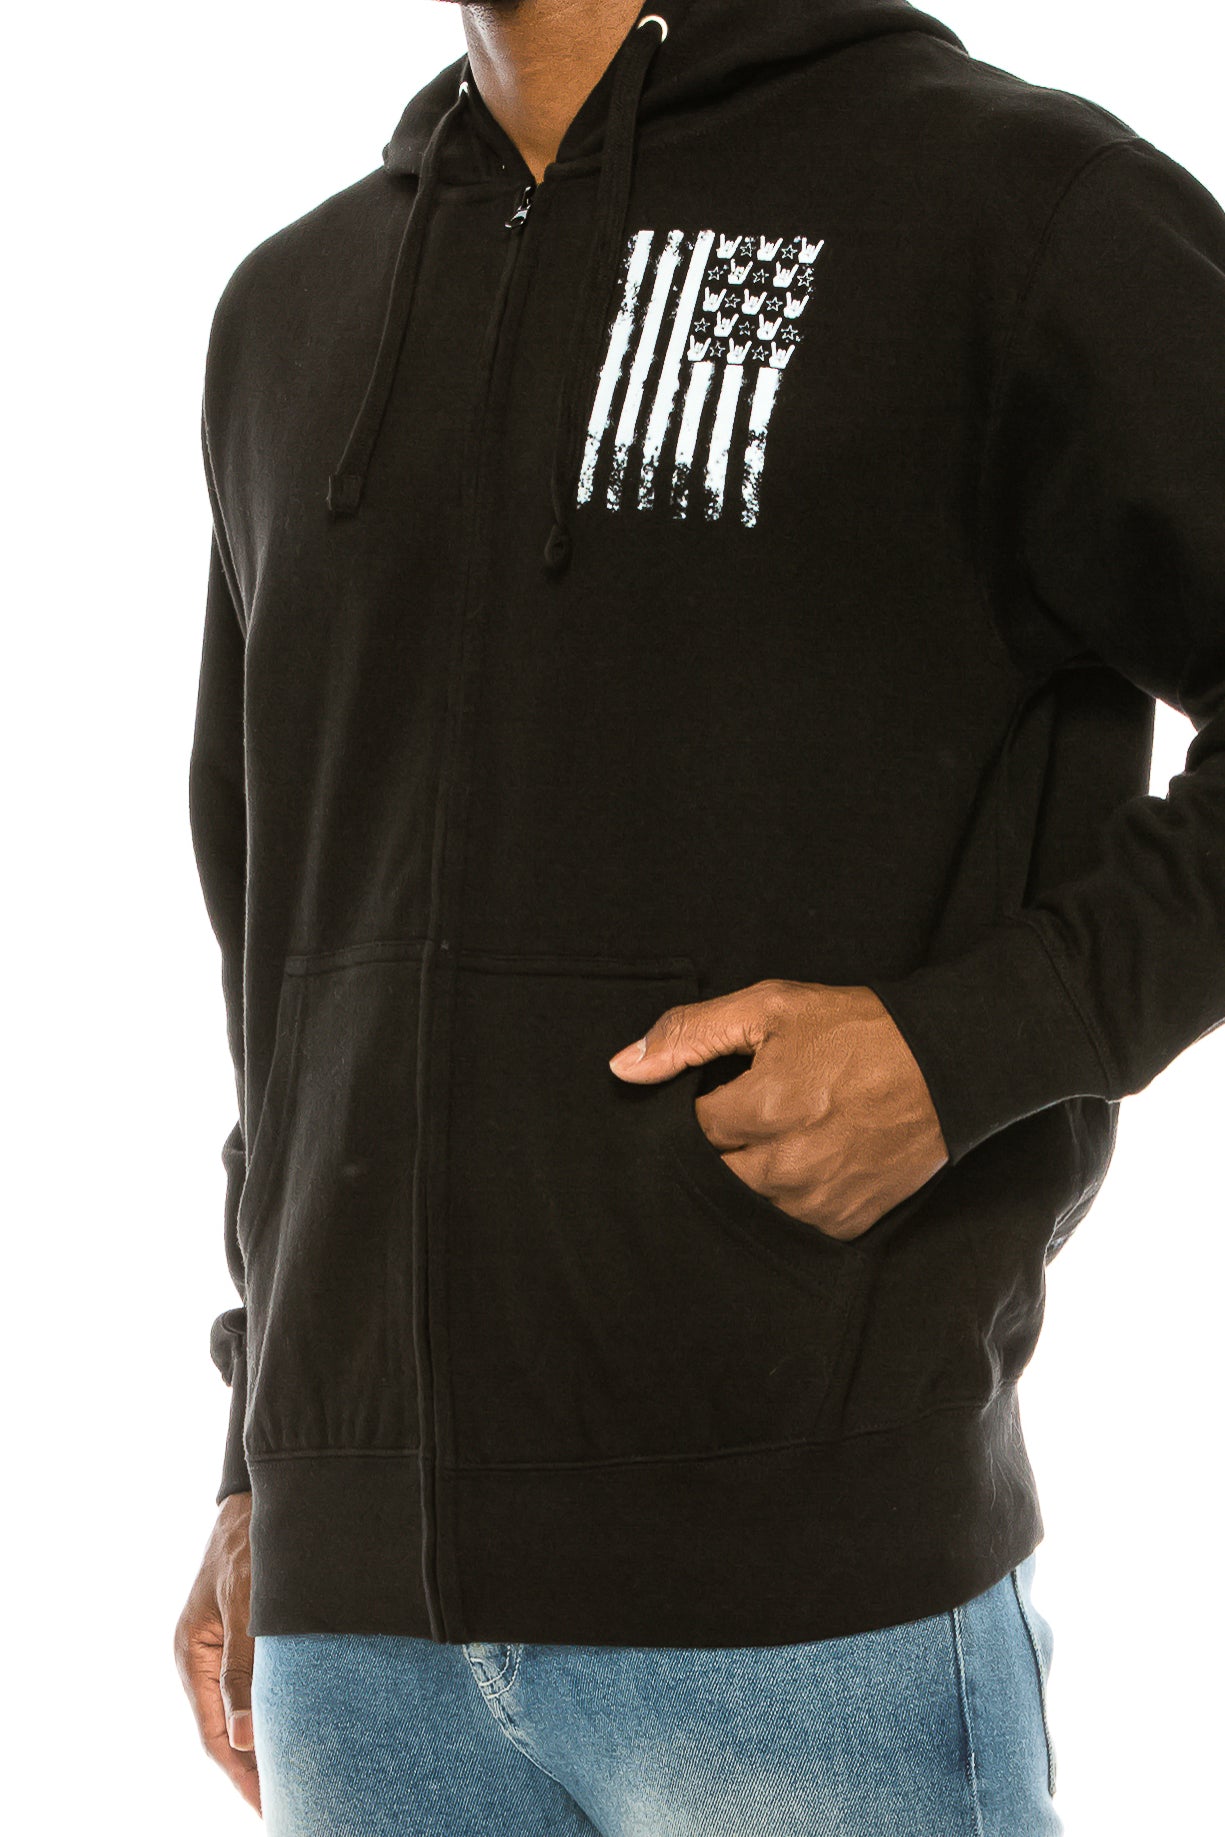 FLAG HANDS AND STRIPES HOODIE ZIP UP - Trailsclothing.com